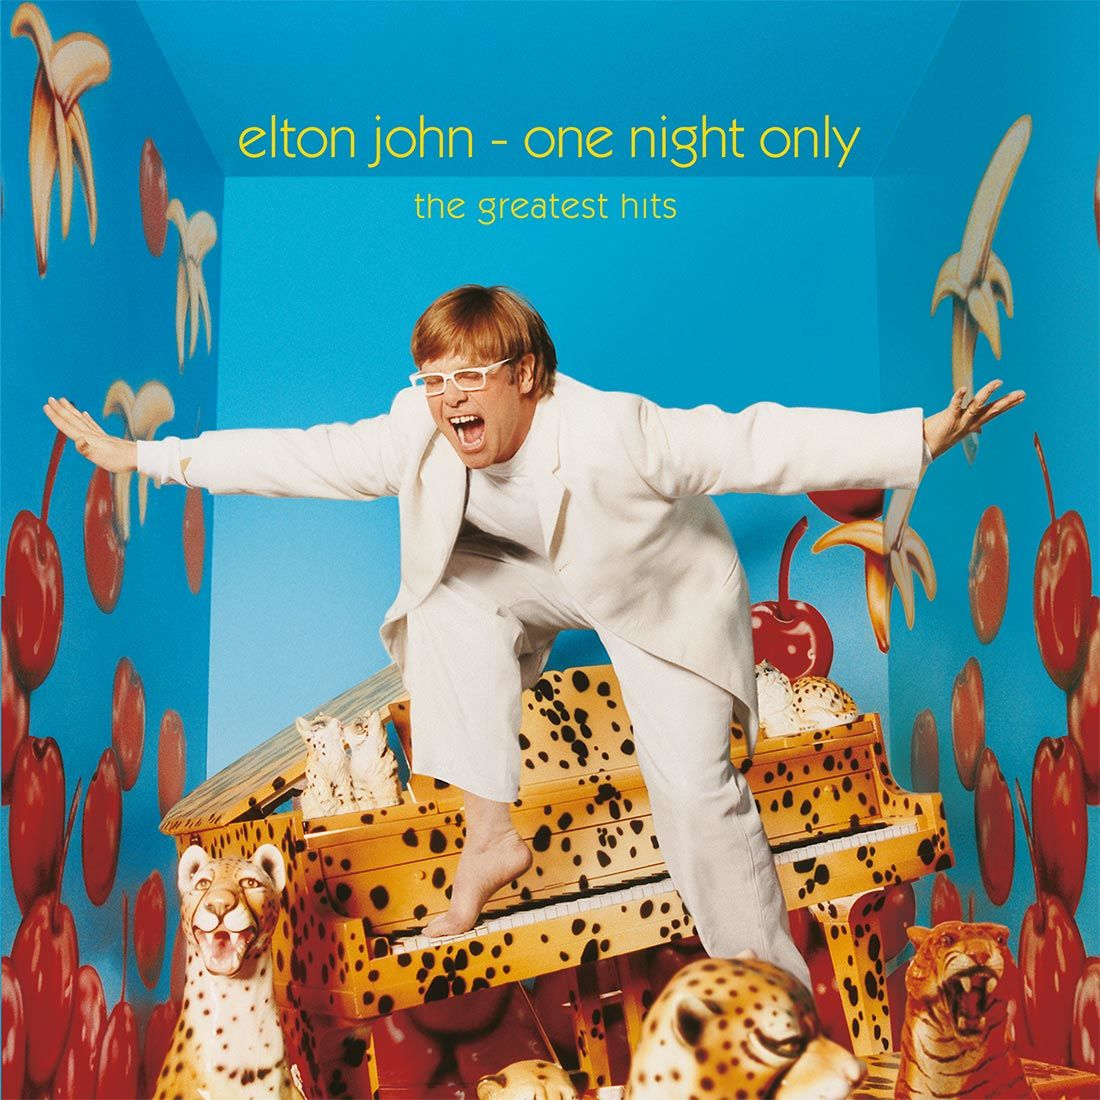 Elton John - One Night Only: the Greatest Hits (LP)